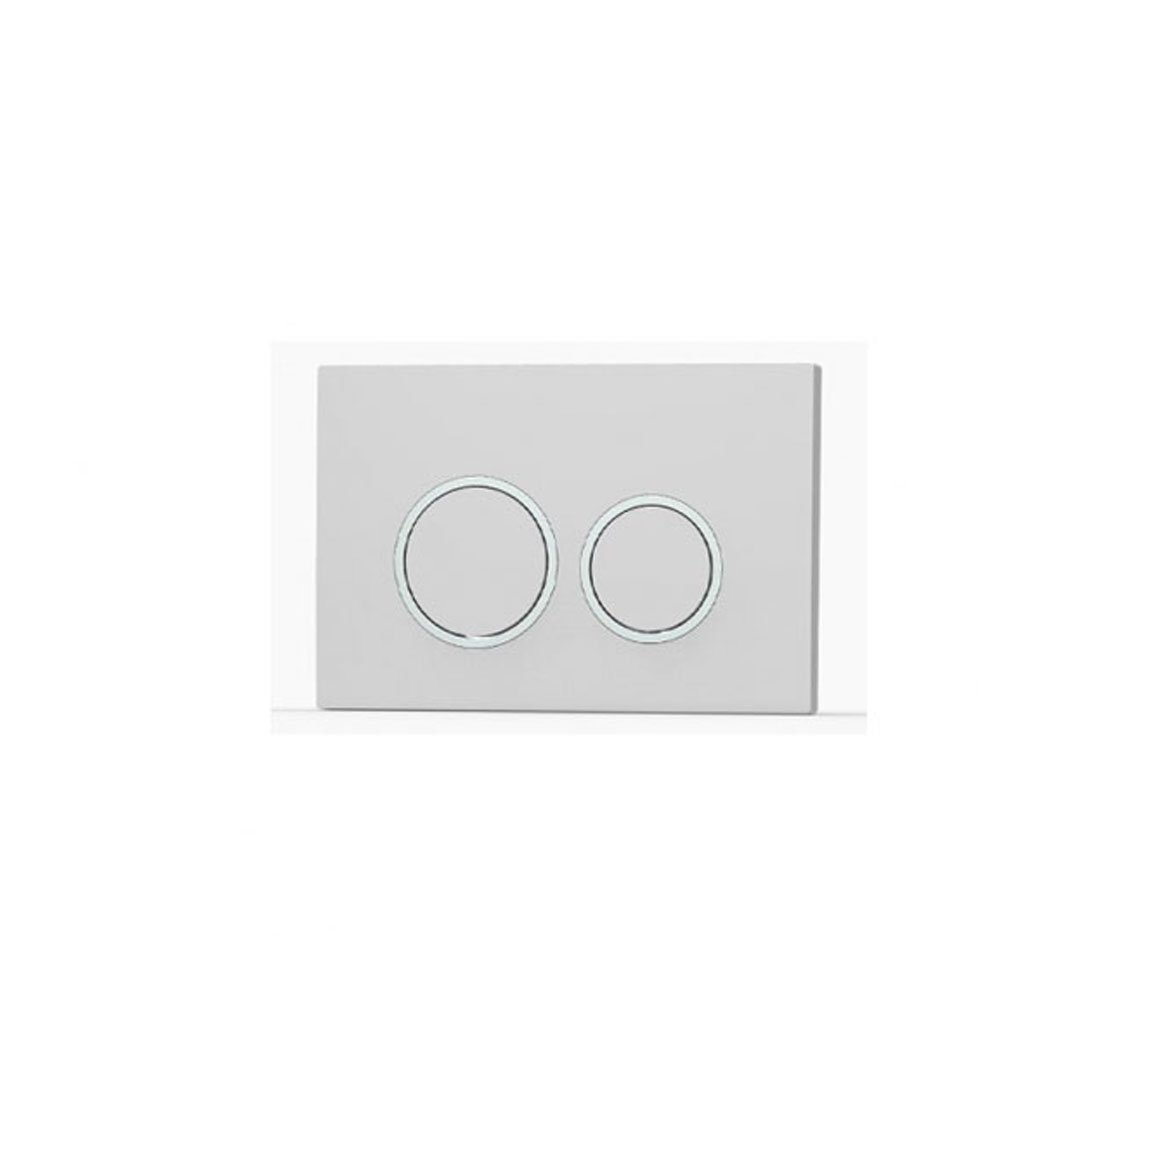 Box Rim Wall Hung Pan With R&T G3005F Framed In Wall Concealed Cistern